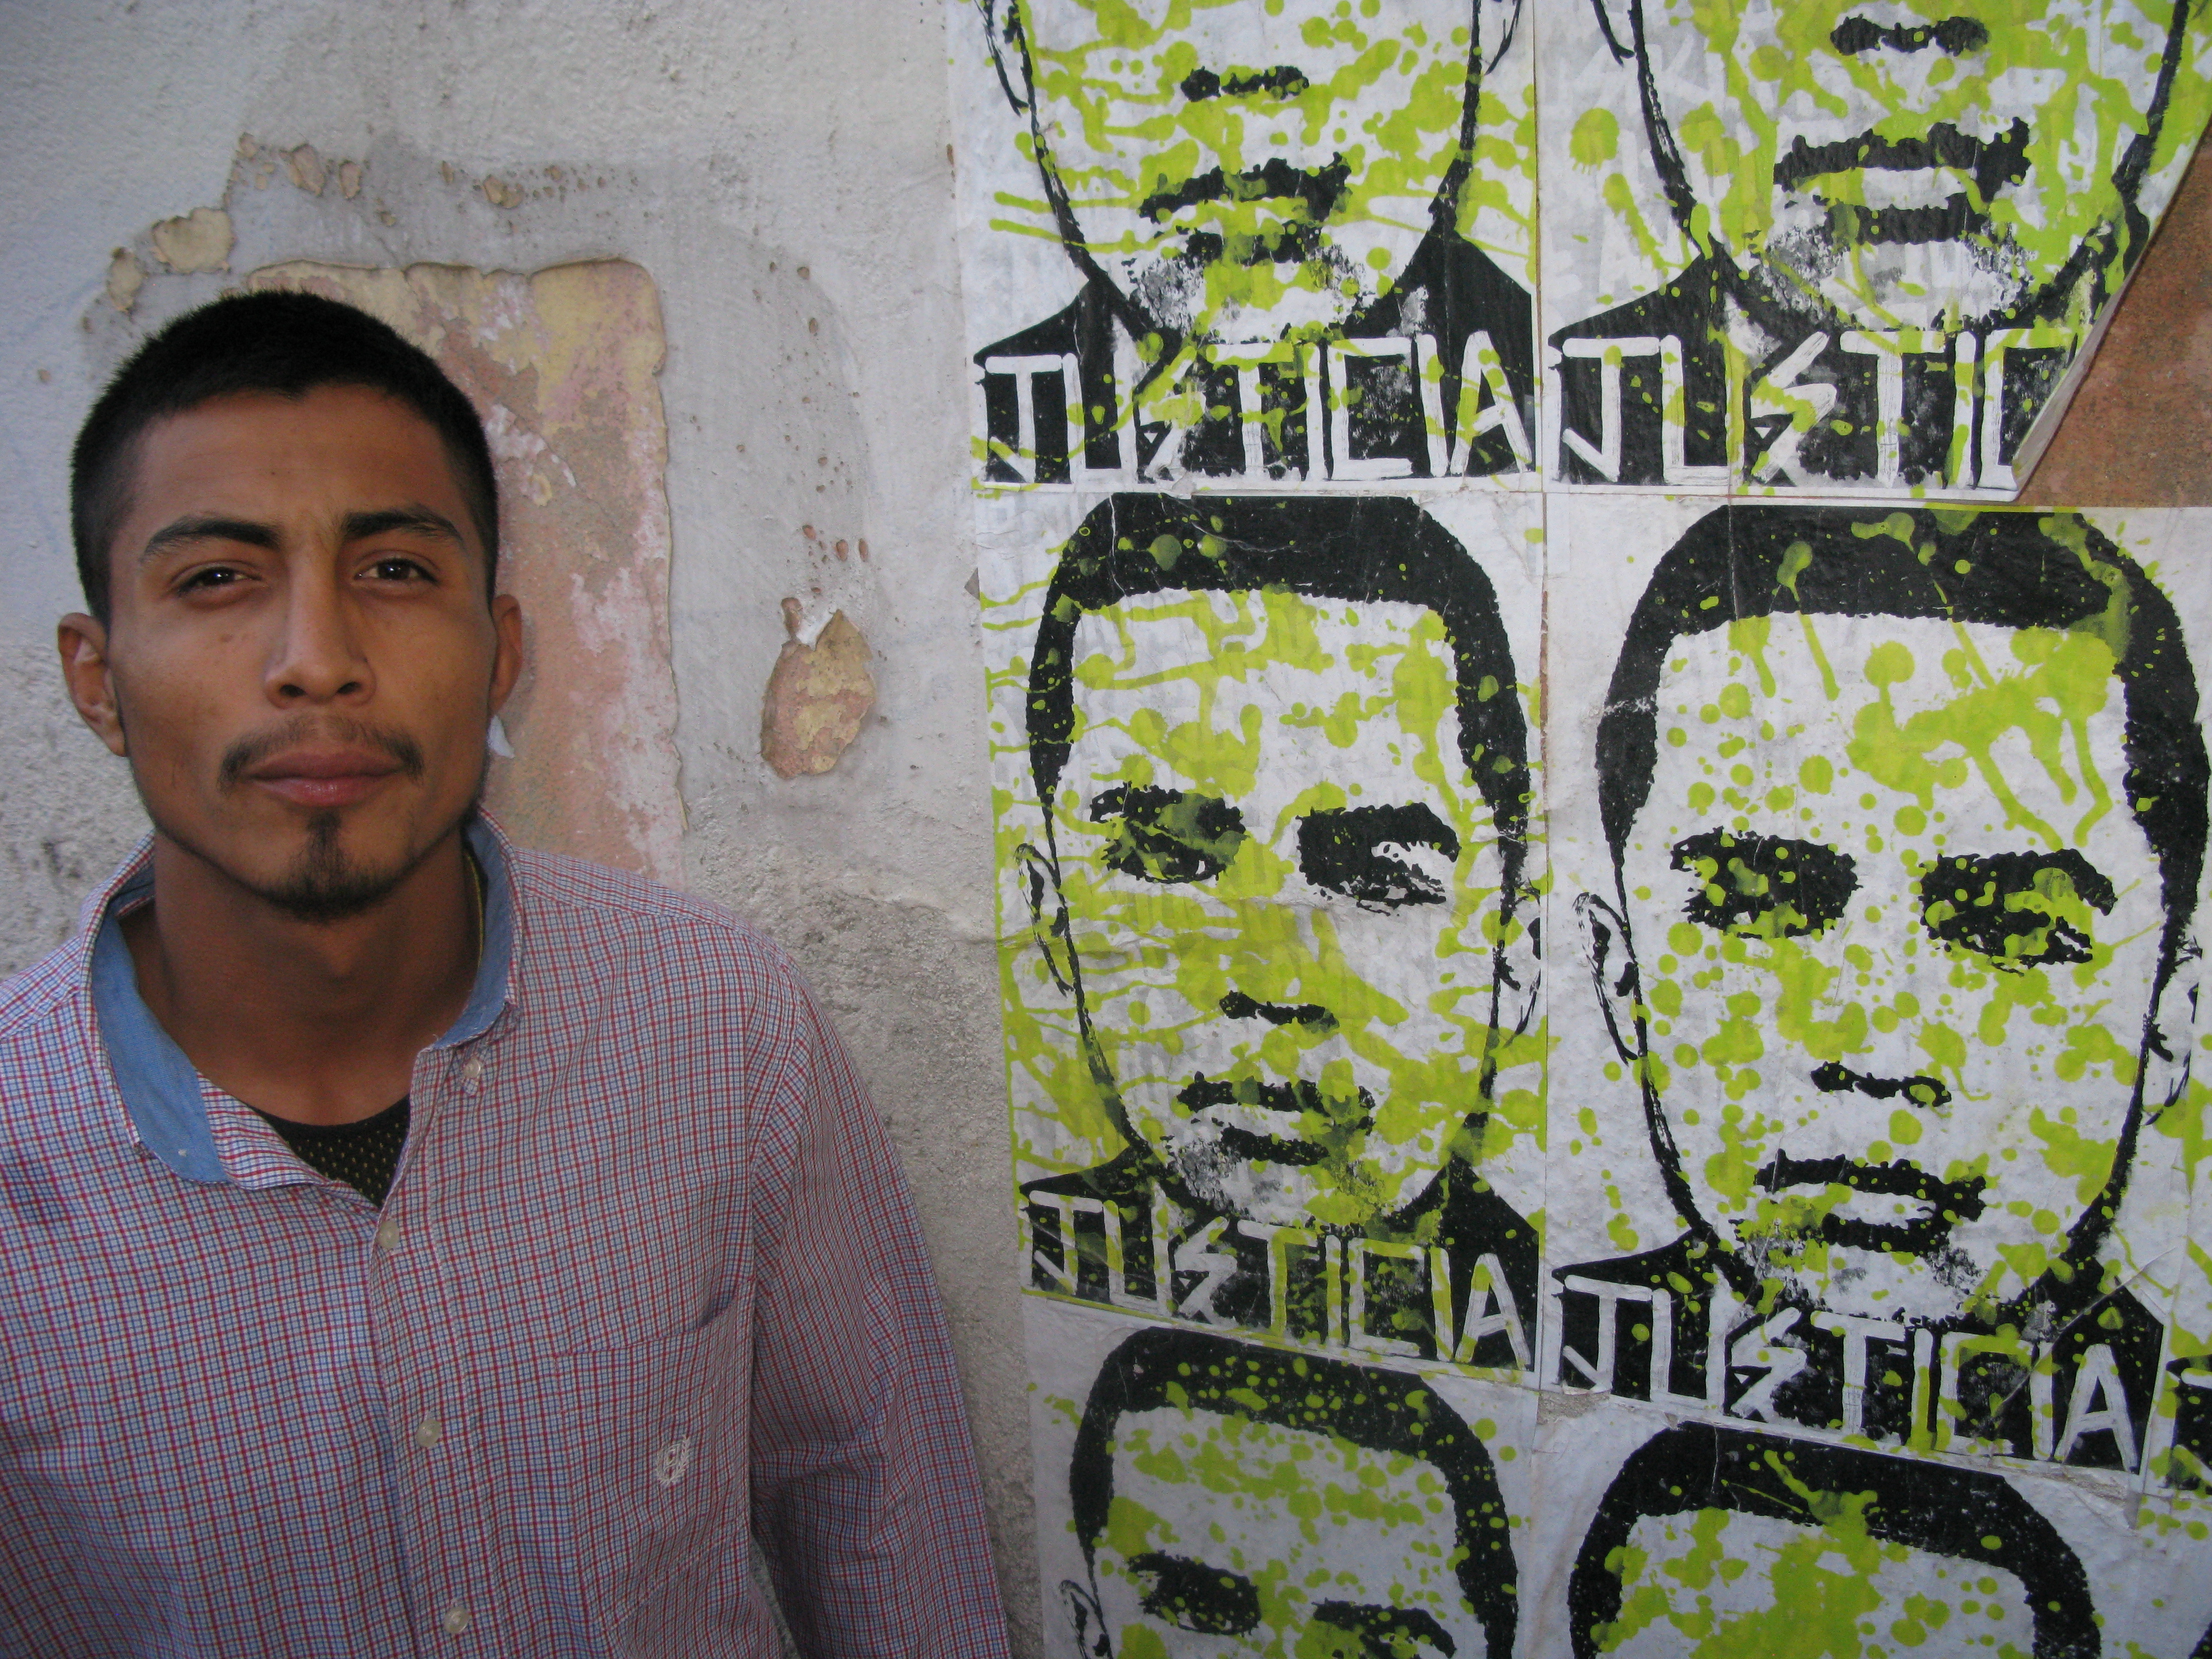 Diego next to posters of his brother Jose. The agent involved in Jose's death will be the first ever charged with murder for a cross-border shooting. (Photo by John Burnett/NPR)